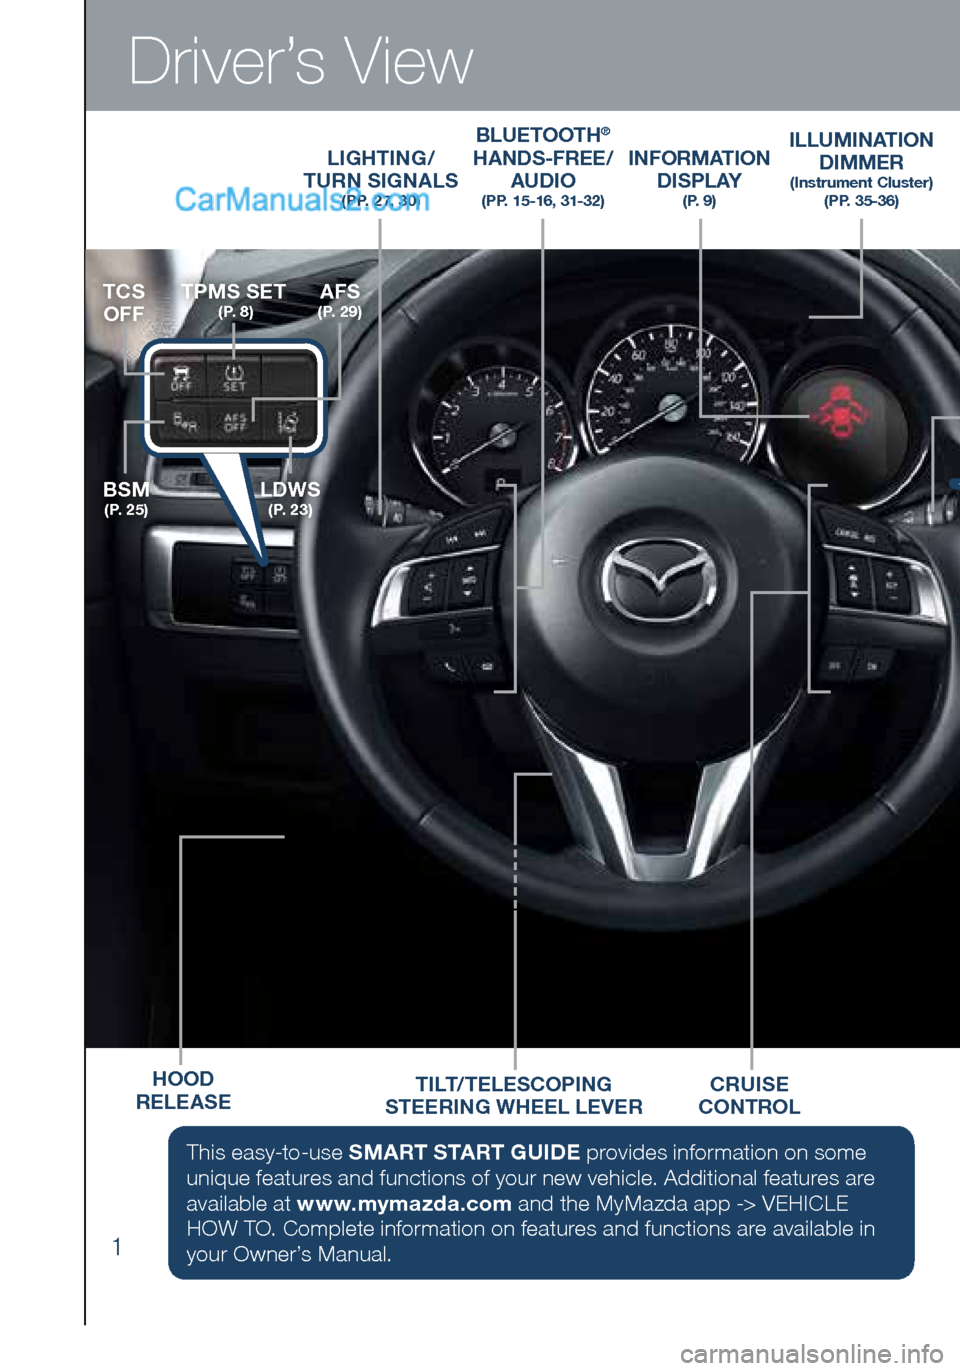 MAZDA MODEL CX-5 2016  Smart Start Guide (in English) 1
LIGHTING/  
TURN SIGNALS  
(PP. 27, 30)
INFORMATION 
DISPLAY  
(P. 9)
HOOD 
RELEASE TILT/TELESCOPING
 
STEERING WHEEL LEVERCRUISE  
CONTROL
TPMS SET   ( P.  8 )AFS   ( P.  2 9 )TCS   
OFF
BSM ( P.  